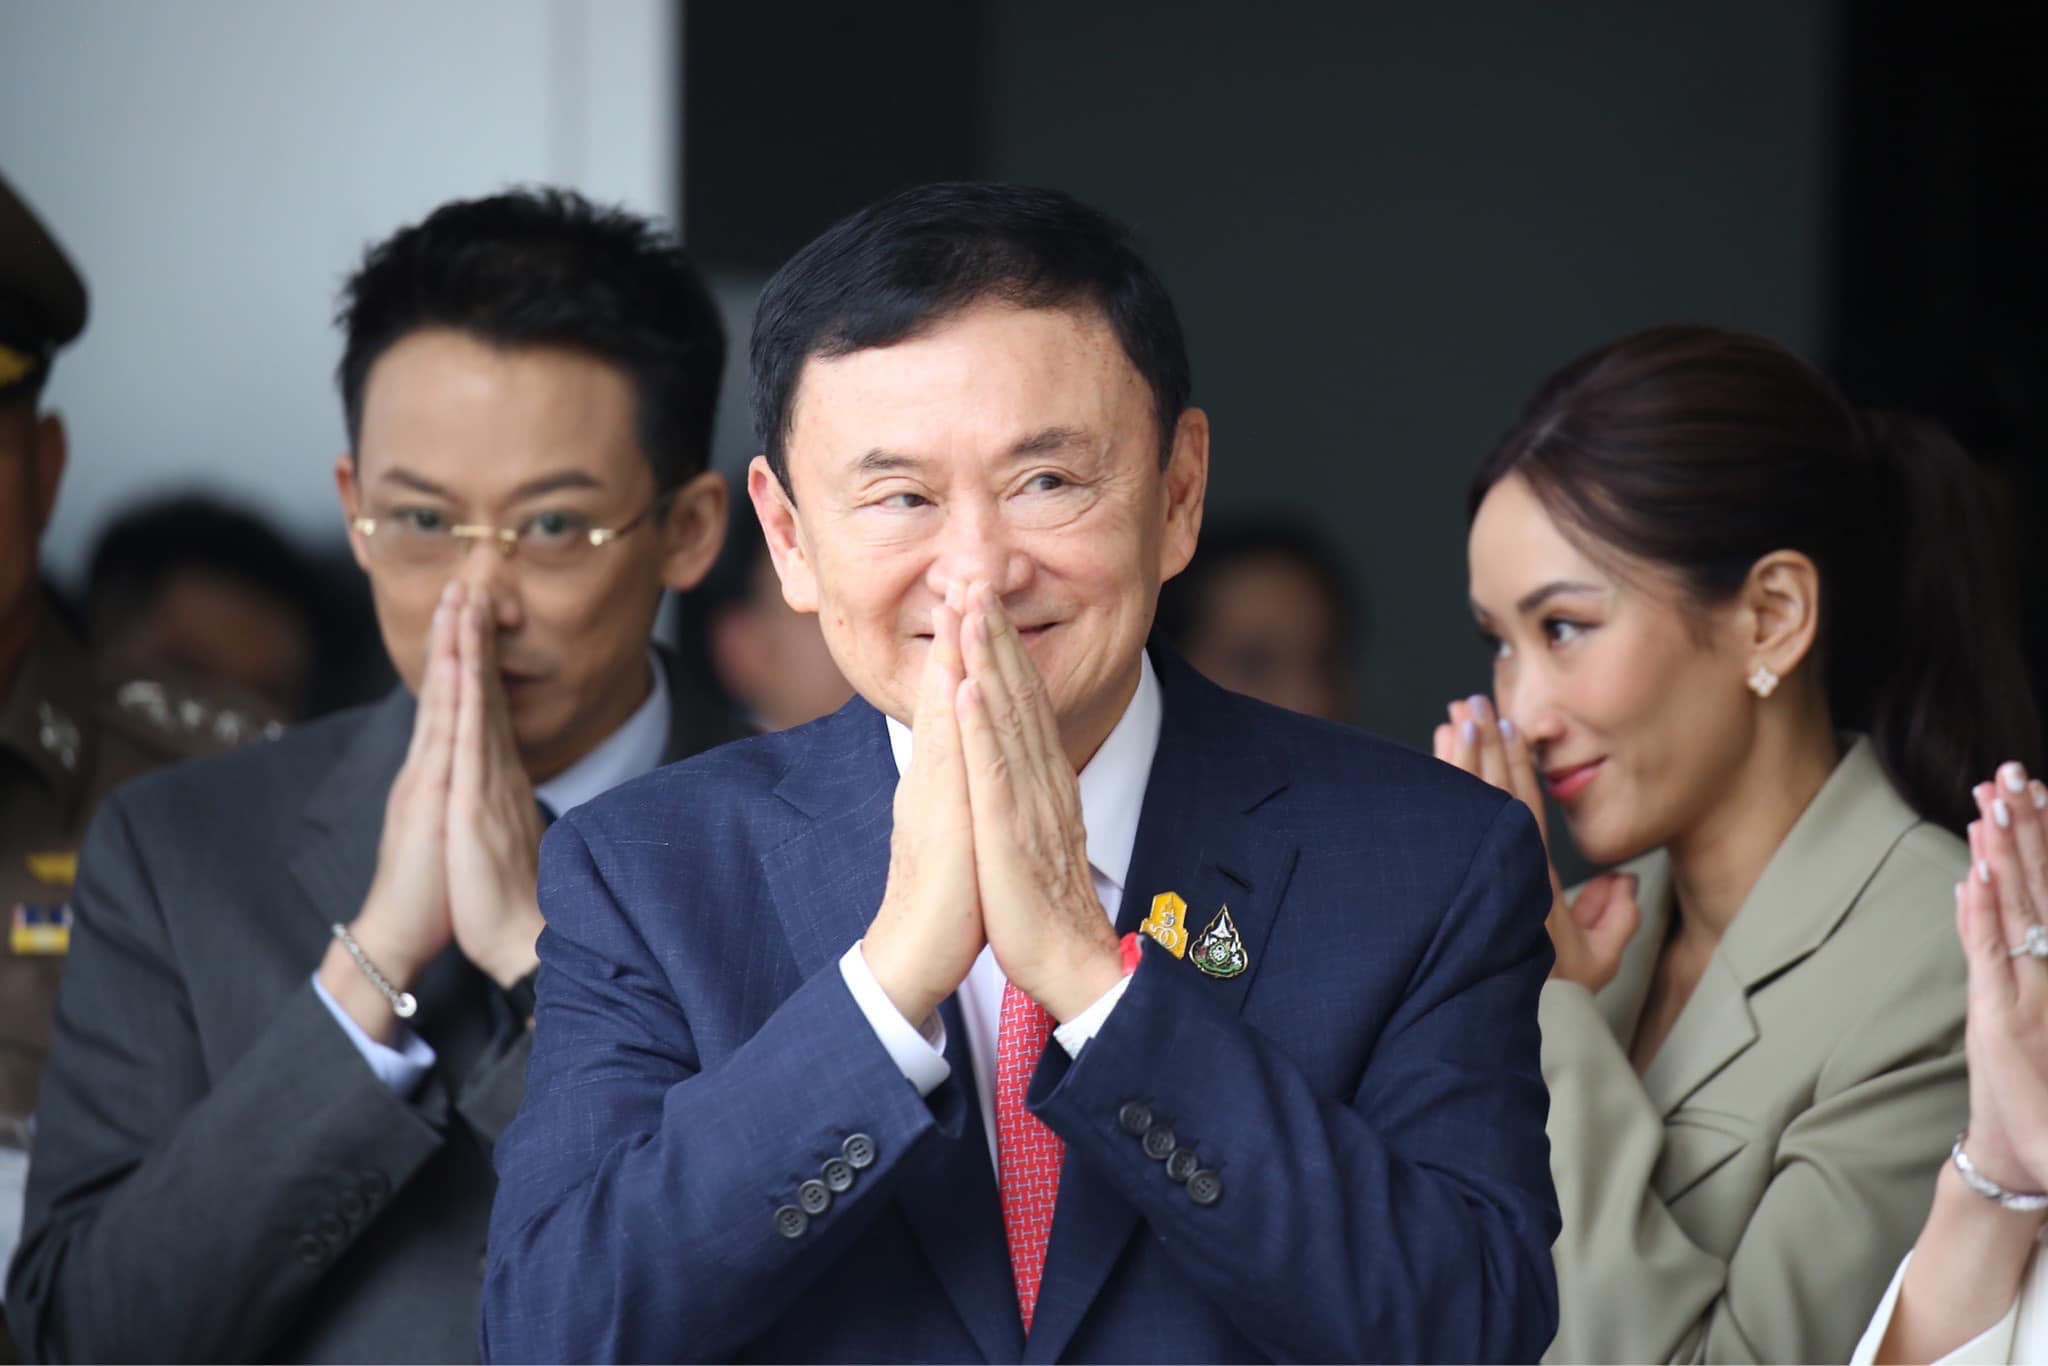 I’m back: Thaksin braves arrest to return to Thailand after 15 years in exile